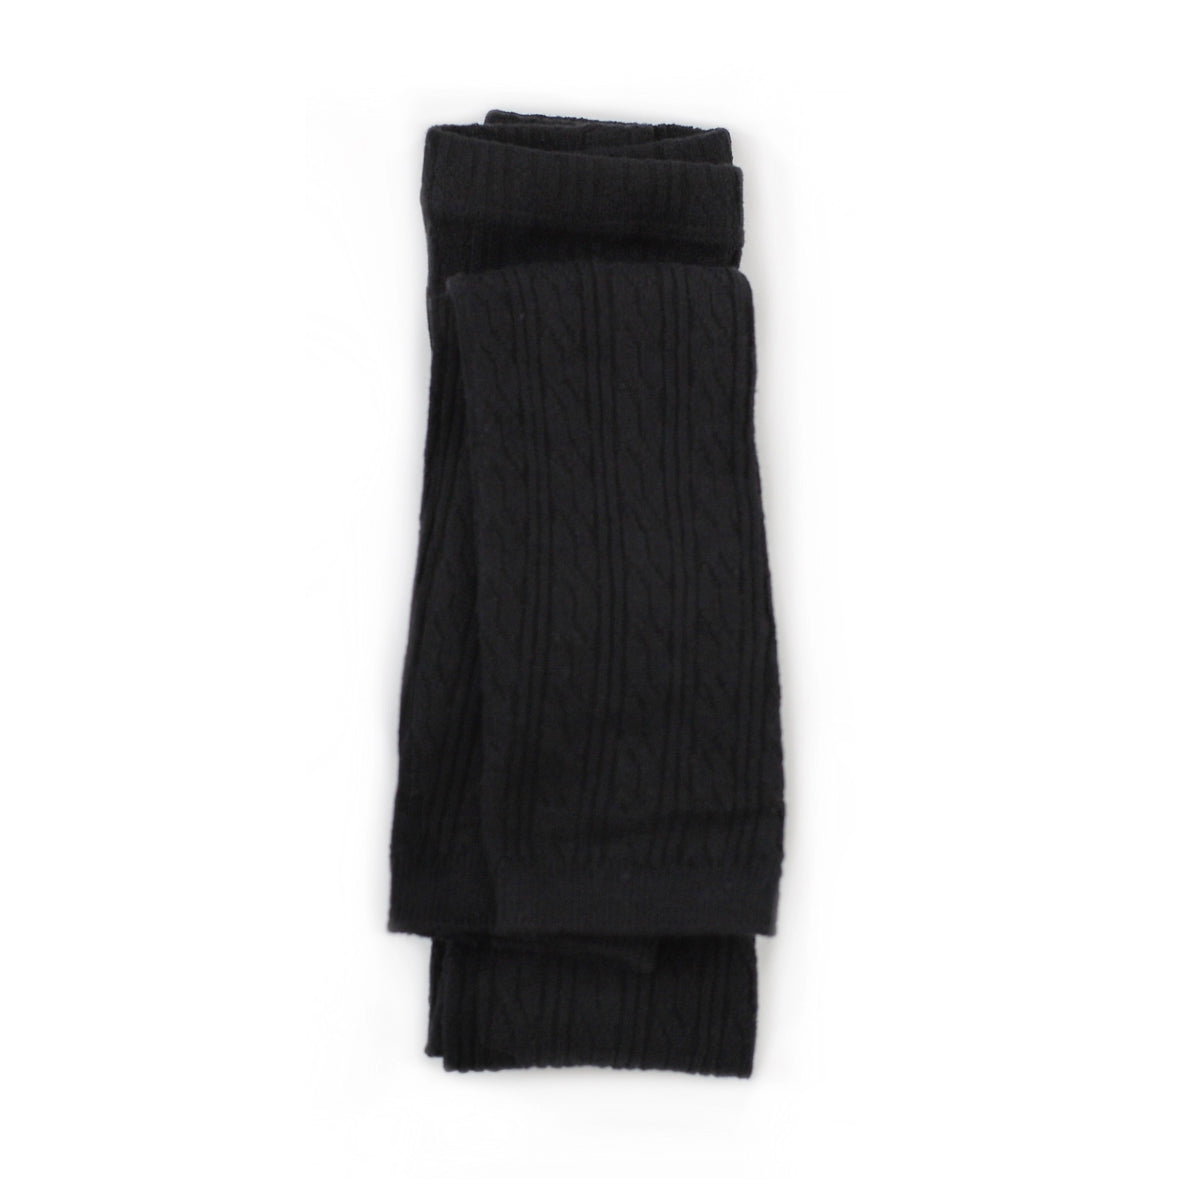 Black Cable Knit Footless Tights